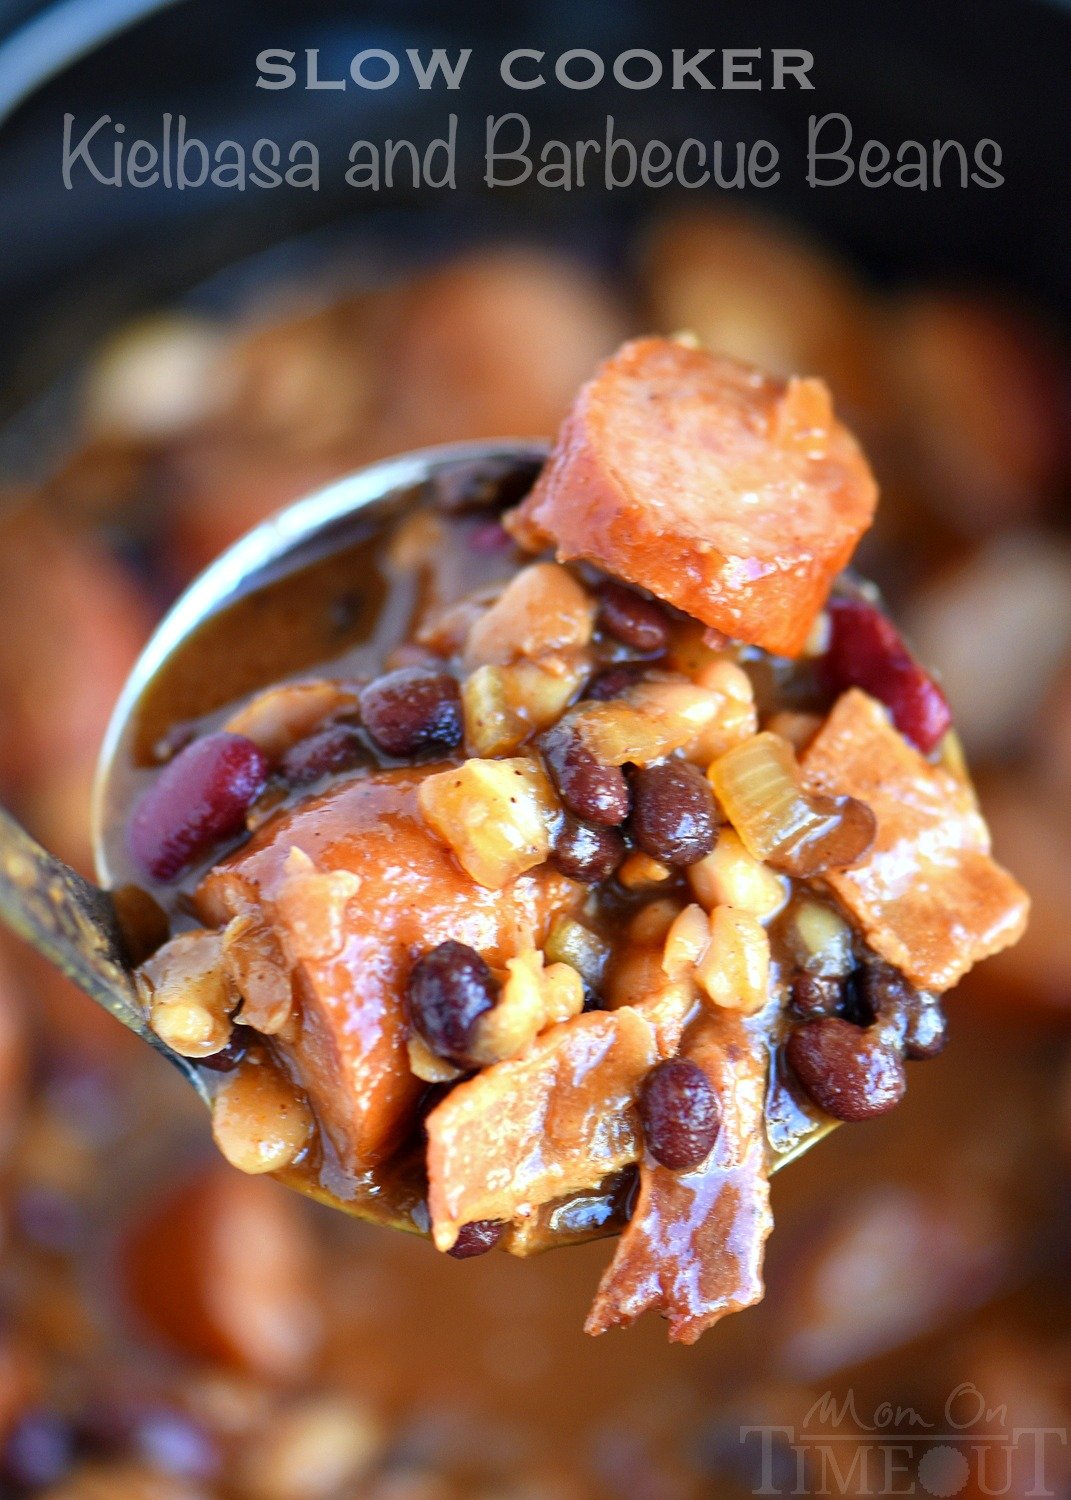 Slow Cooker Kielbasa and Barbecue Beans recipe